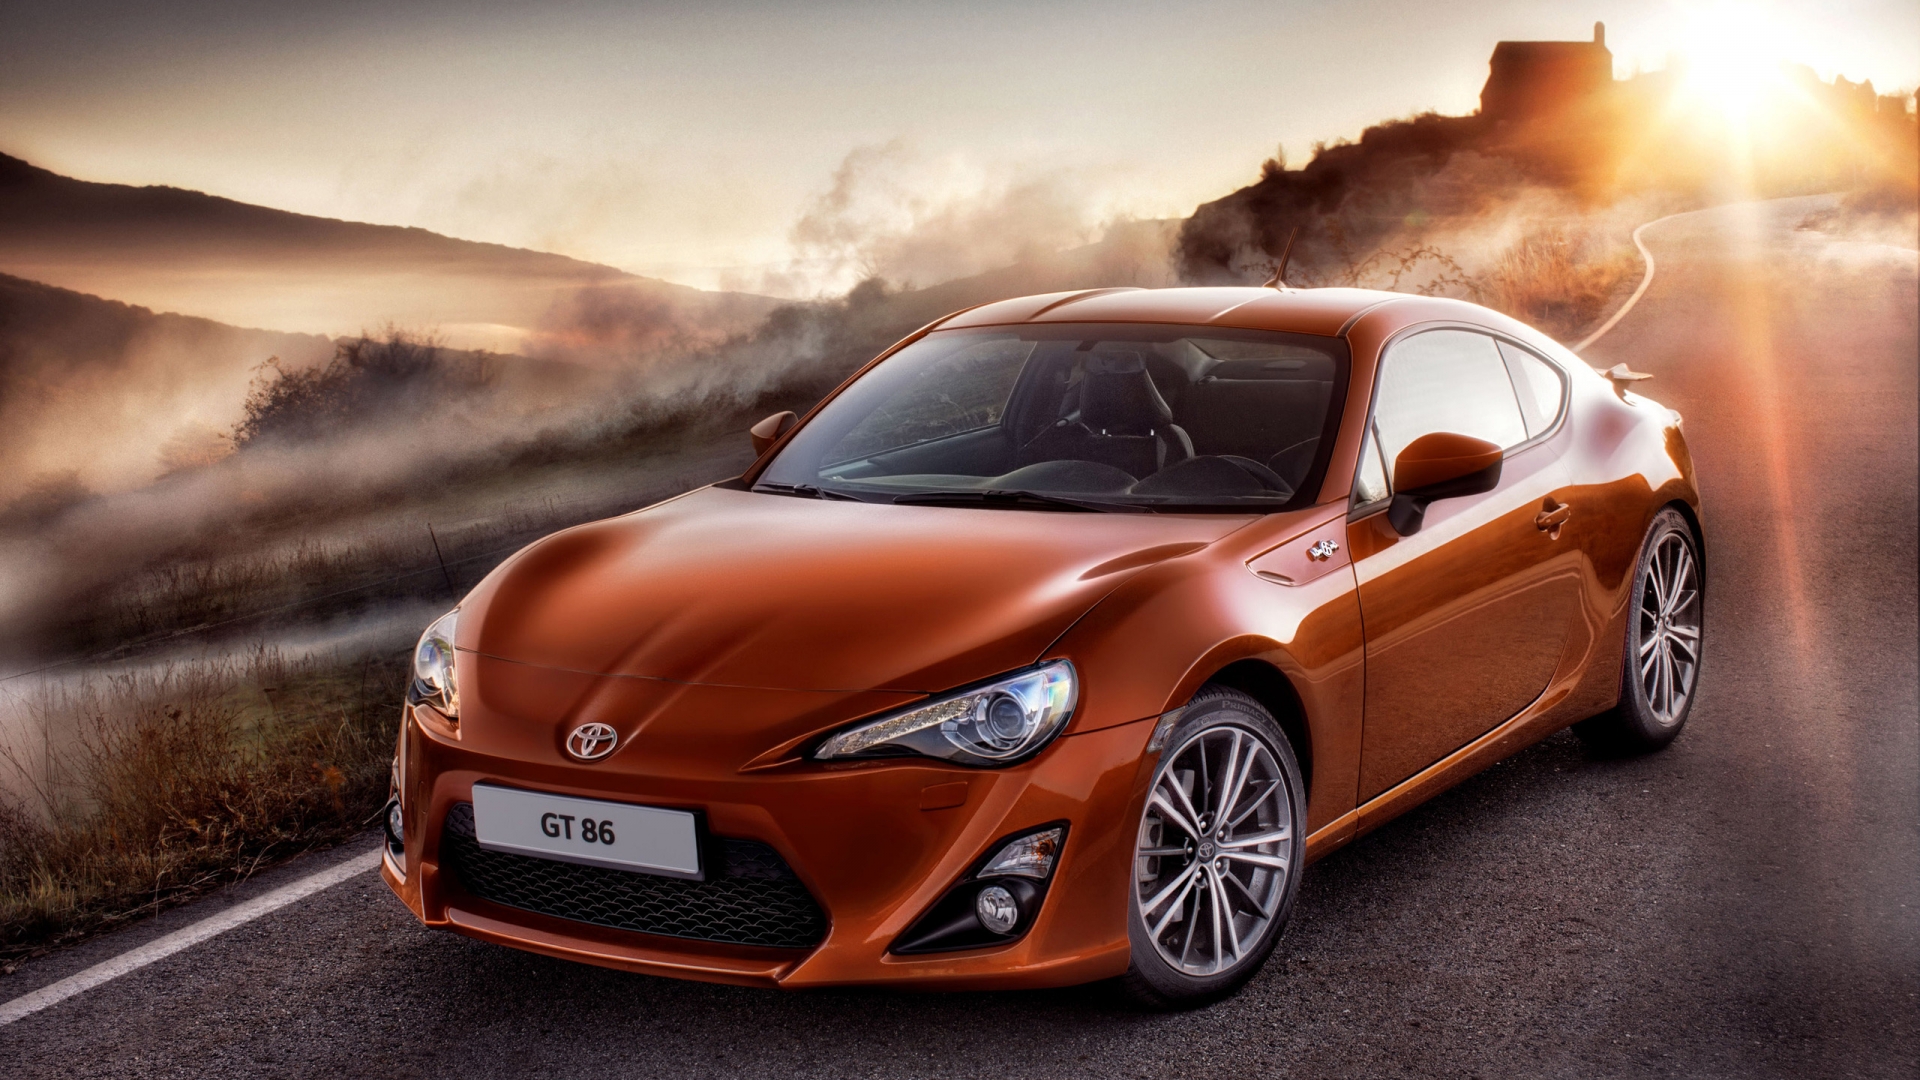 Amazing Toyota GT 86 for 1920 x 1080 HDTV 1080p resolution